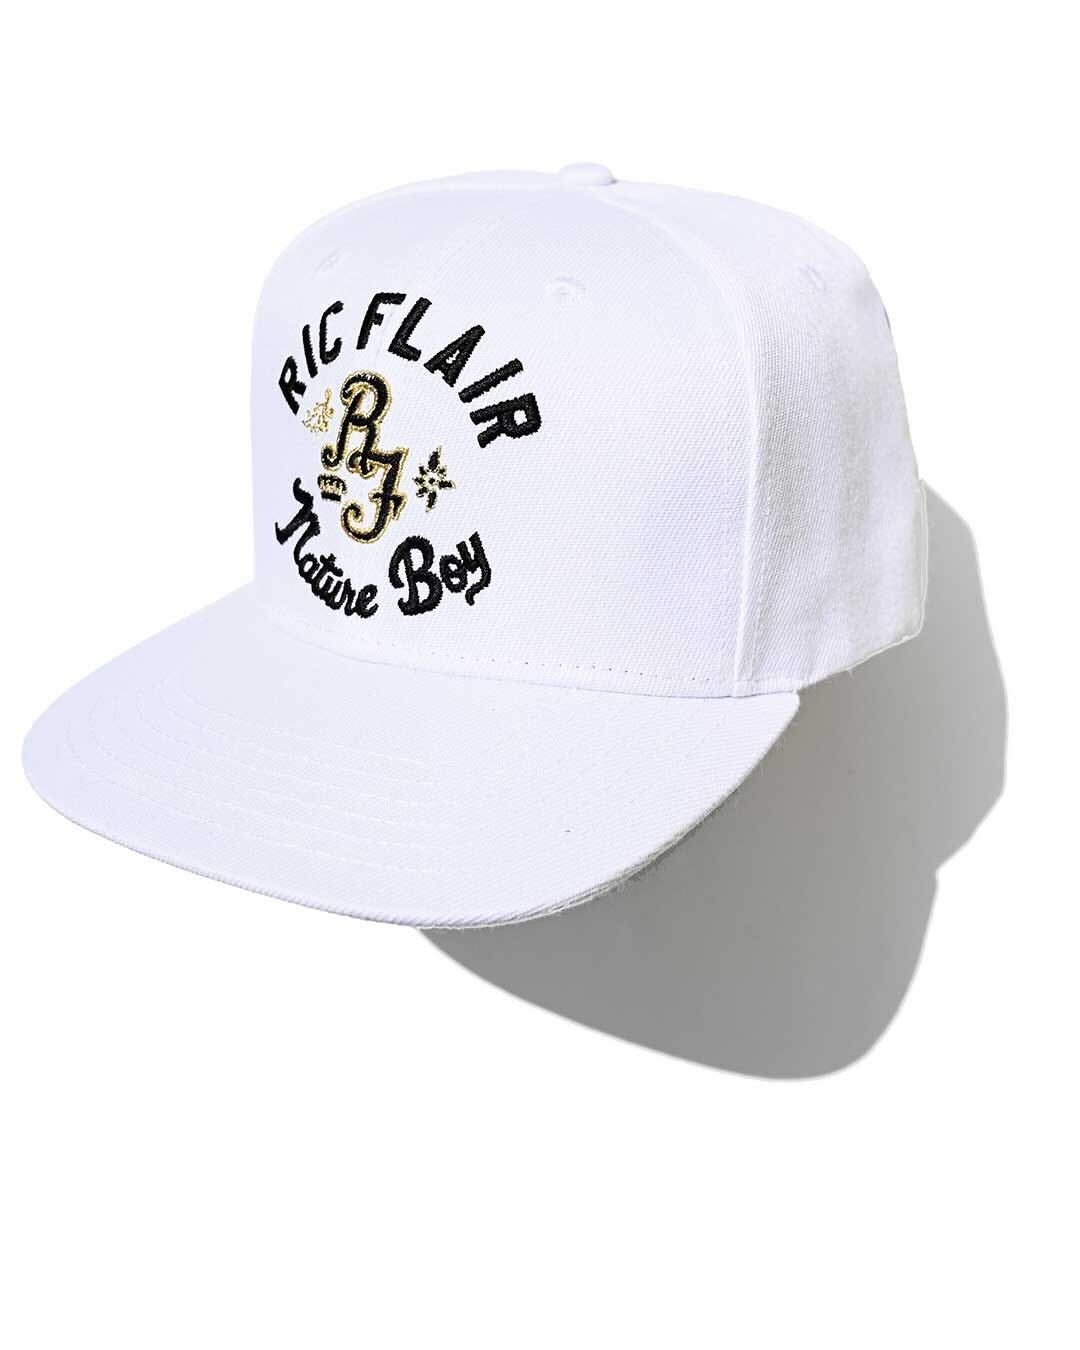 Ric Flair Nature Boy White Snapback Hat - Roots of Fight